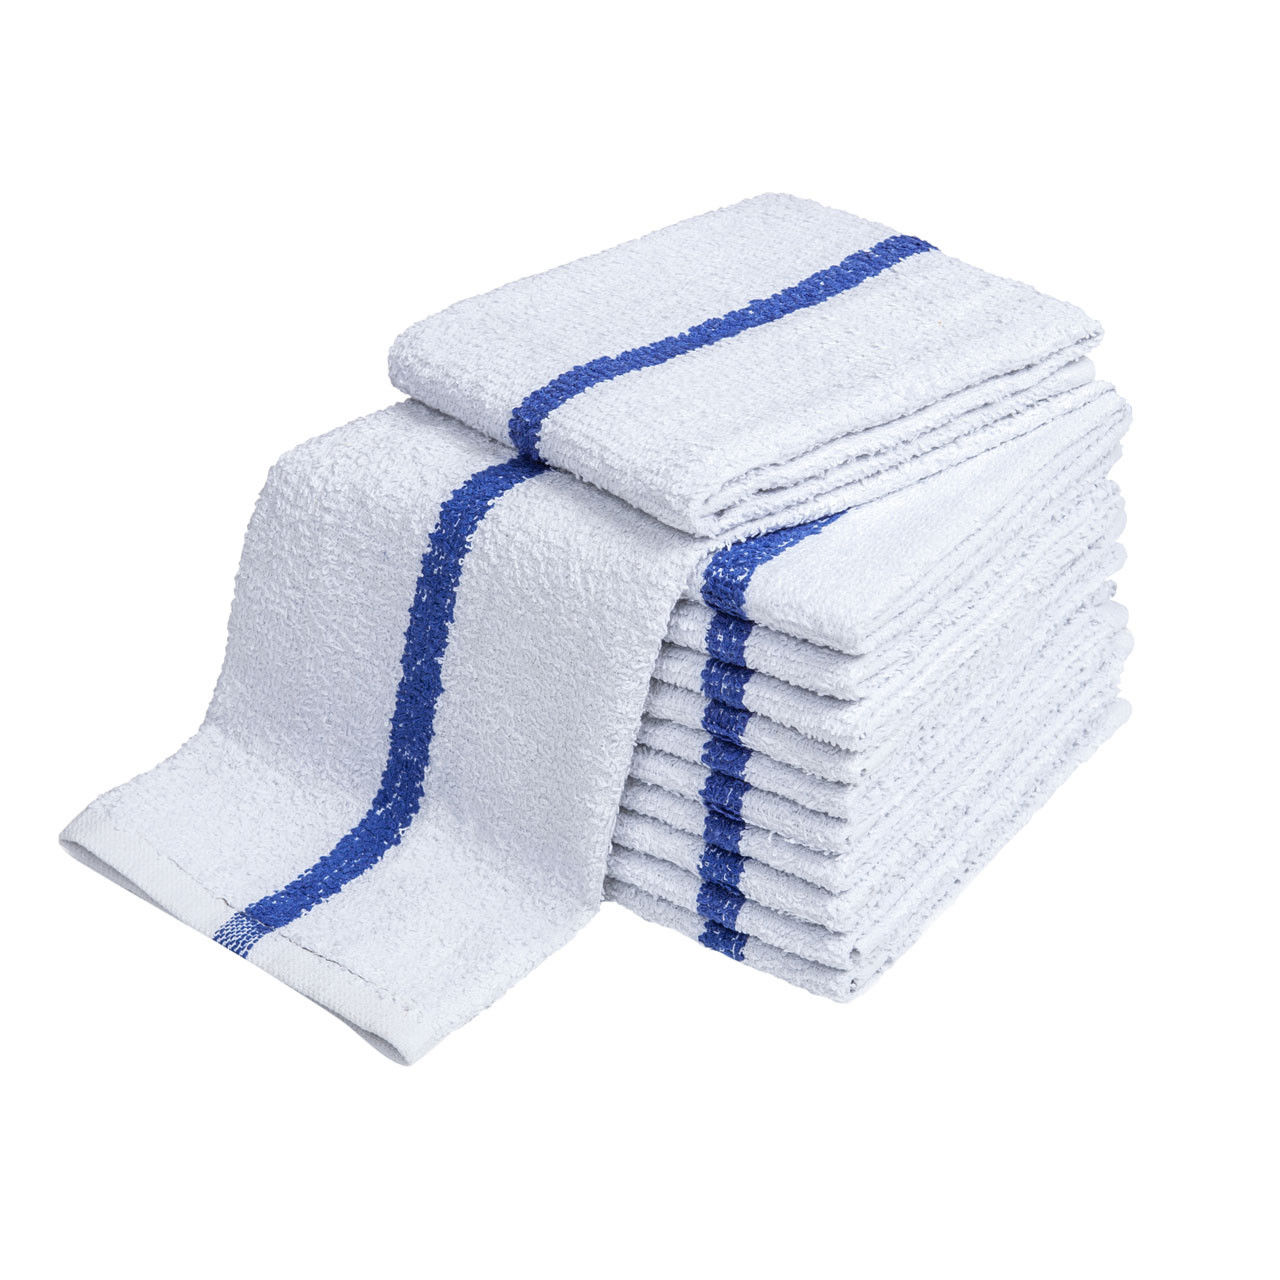 What are bar towels made of?